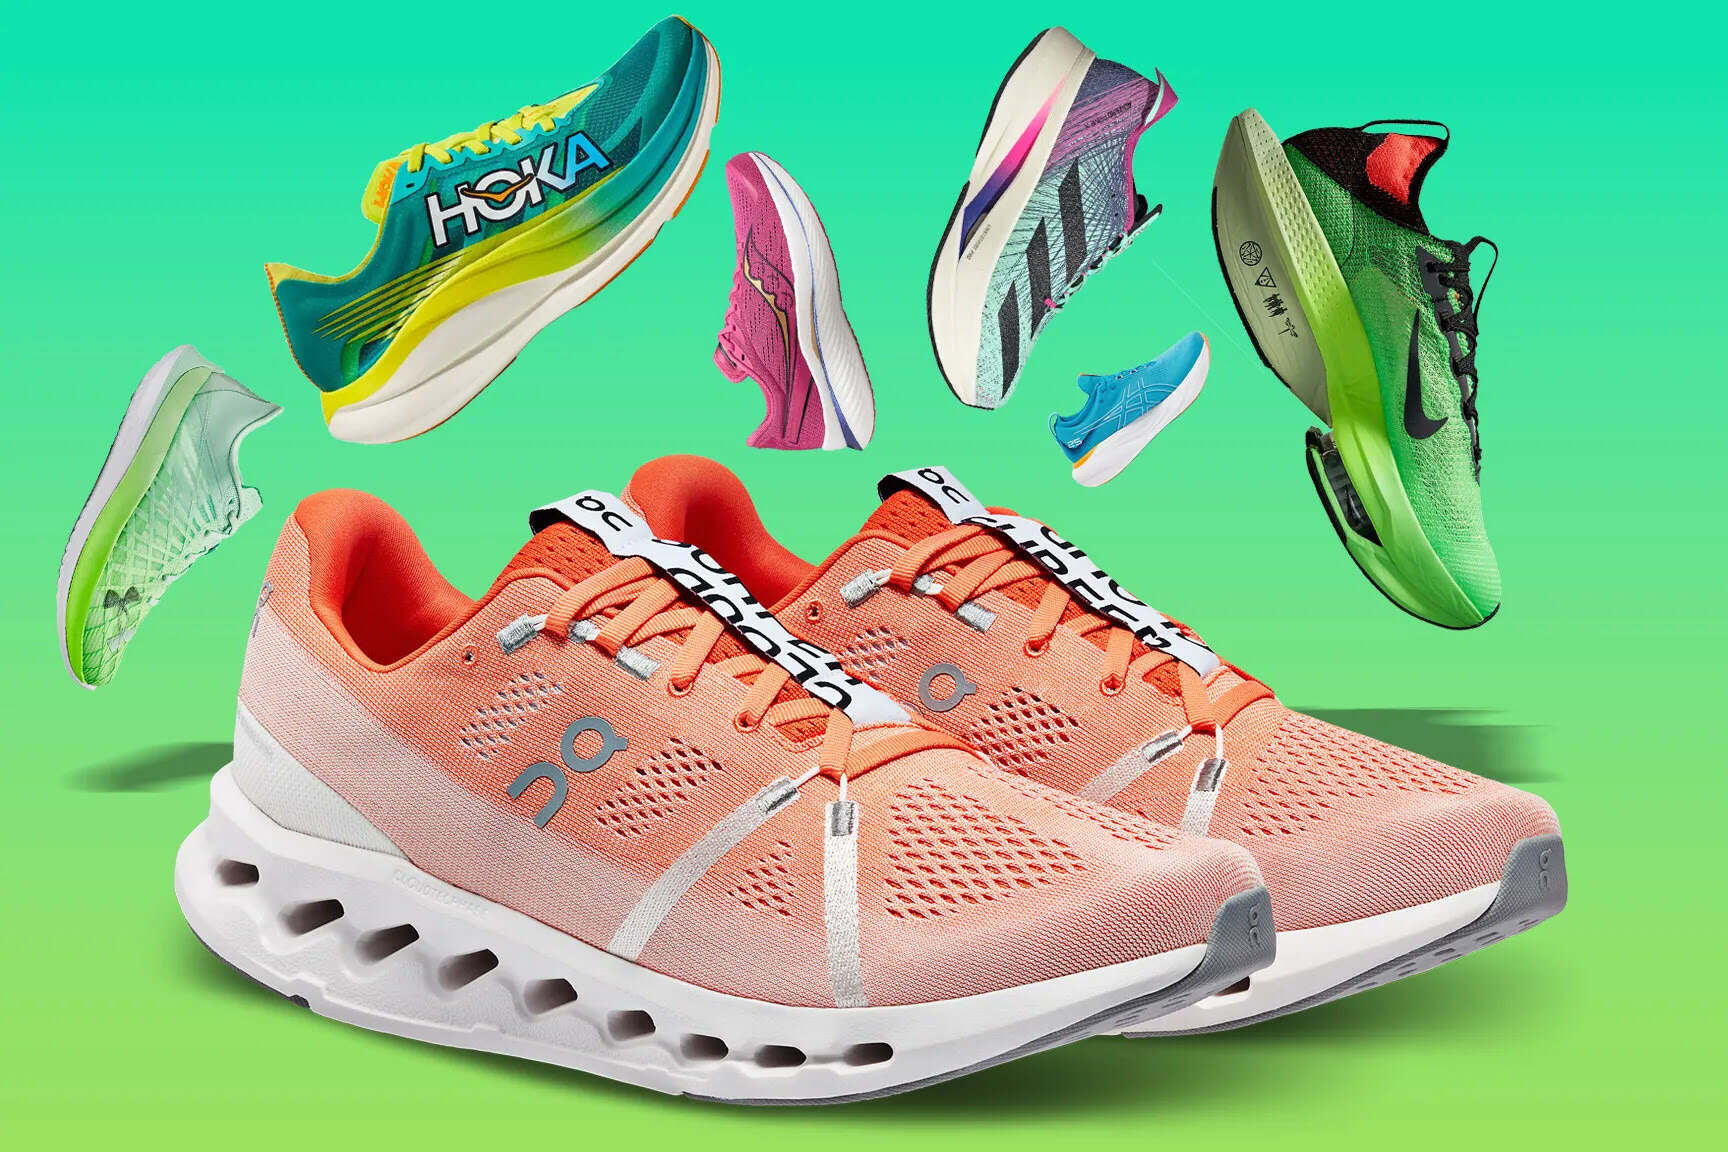 Score Big Savings On Discount Running Shoes For Your Next Marathon